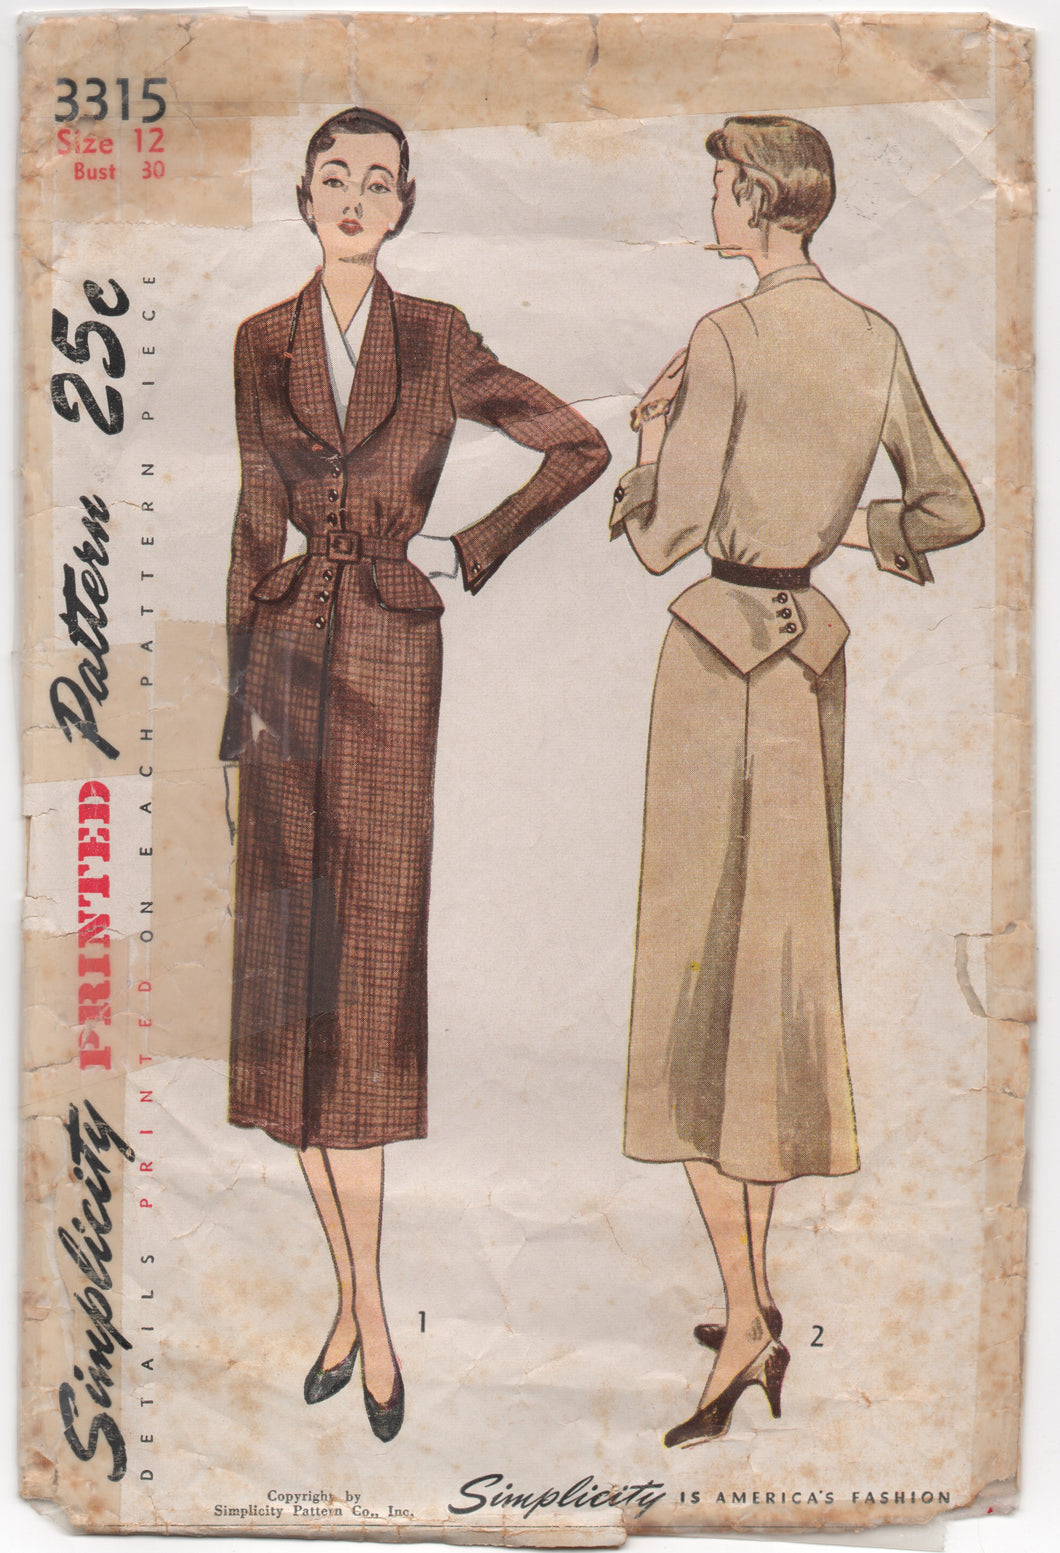 1950's Simplicity One Piece Dress with Button Front, Cross Peplum, and Dickey - Bust 30